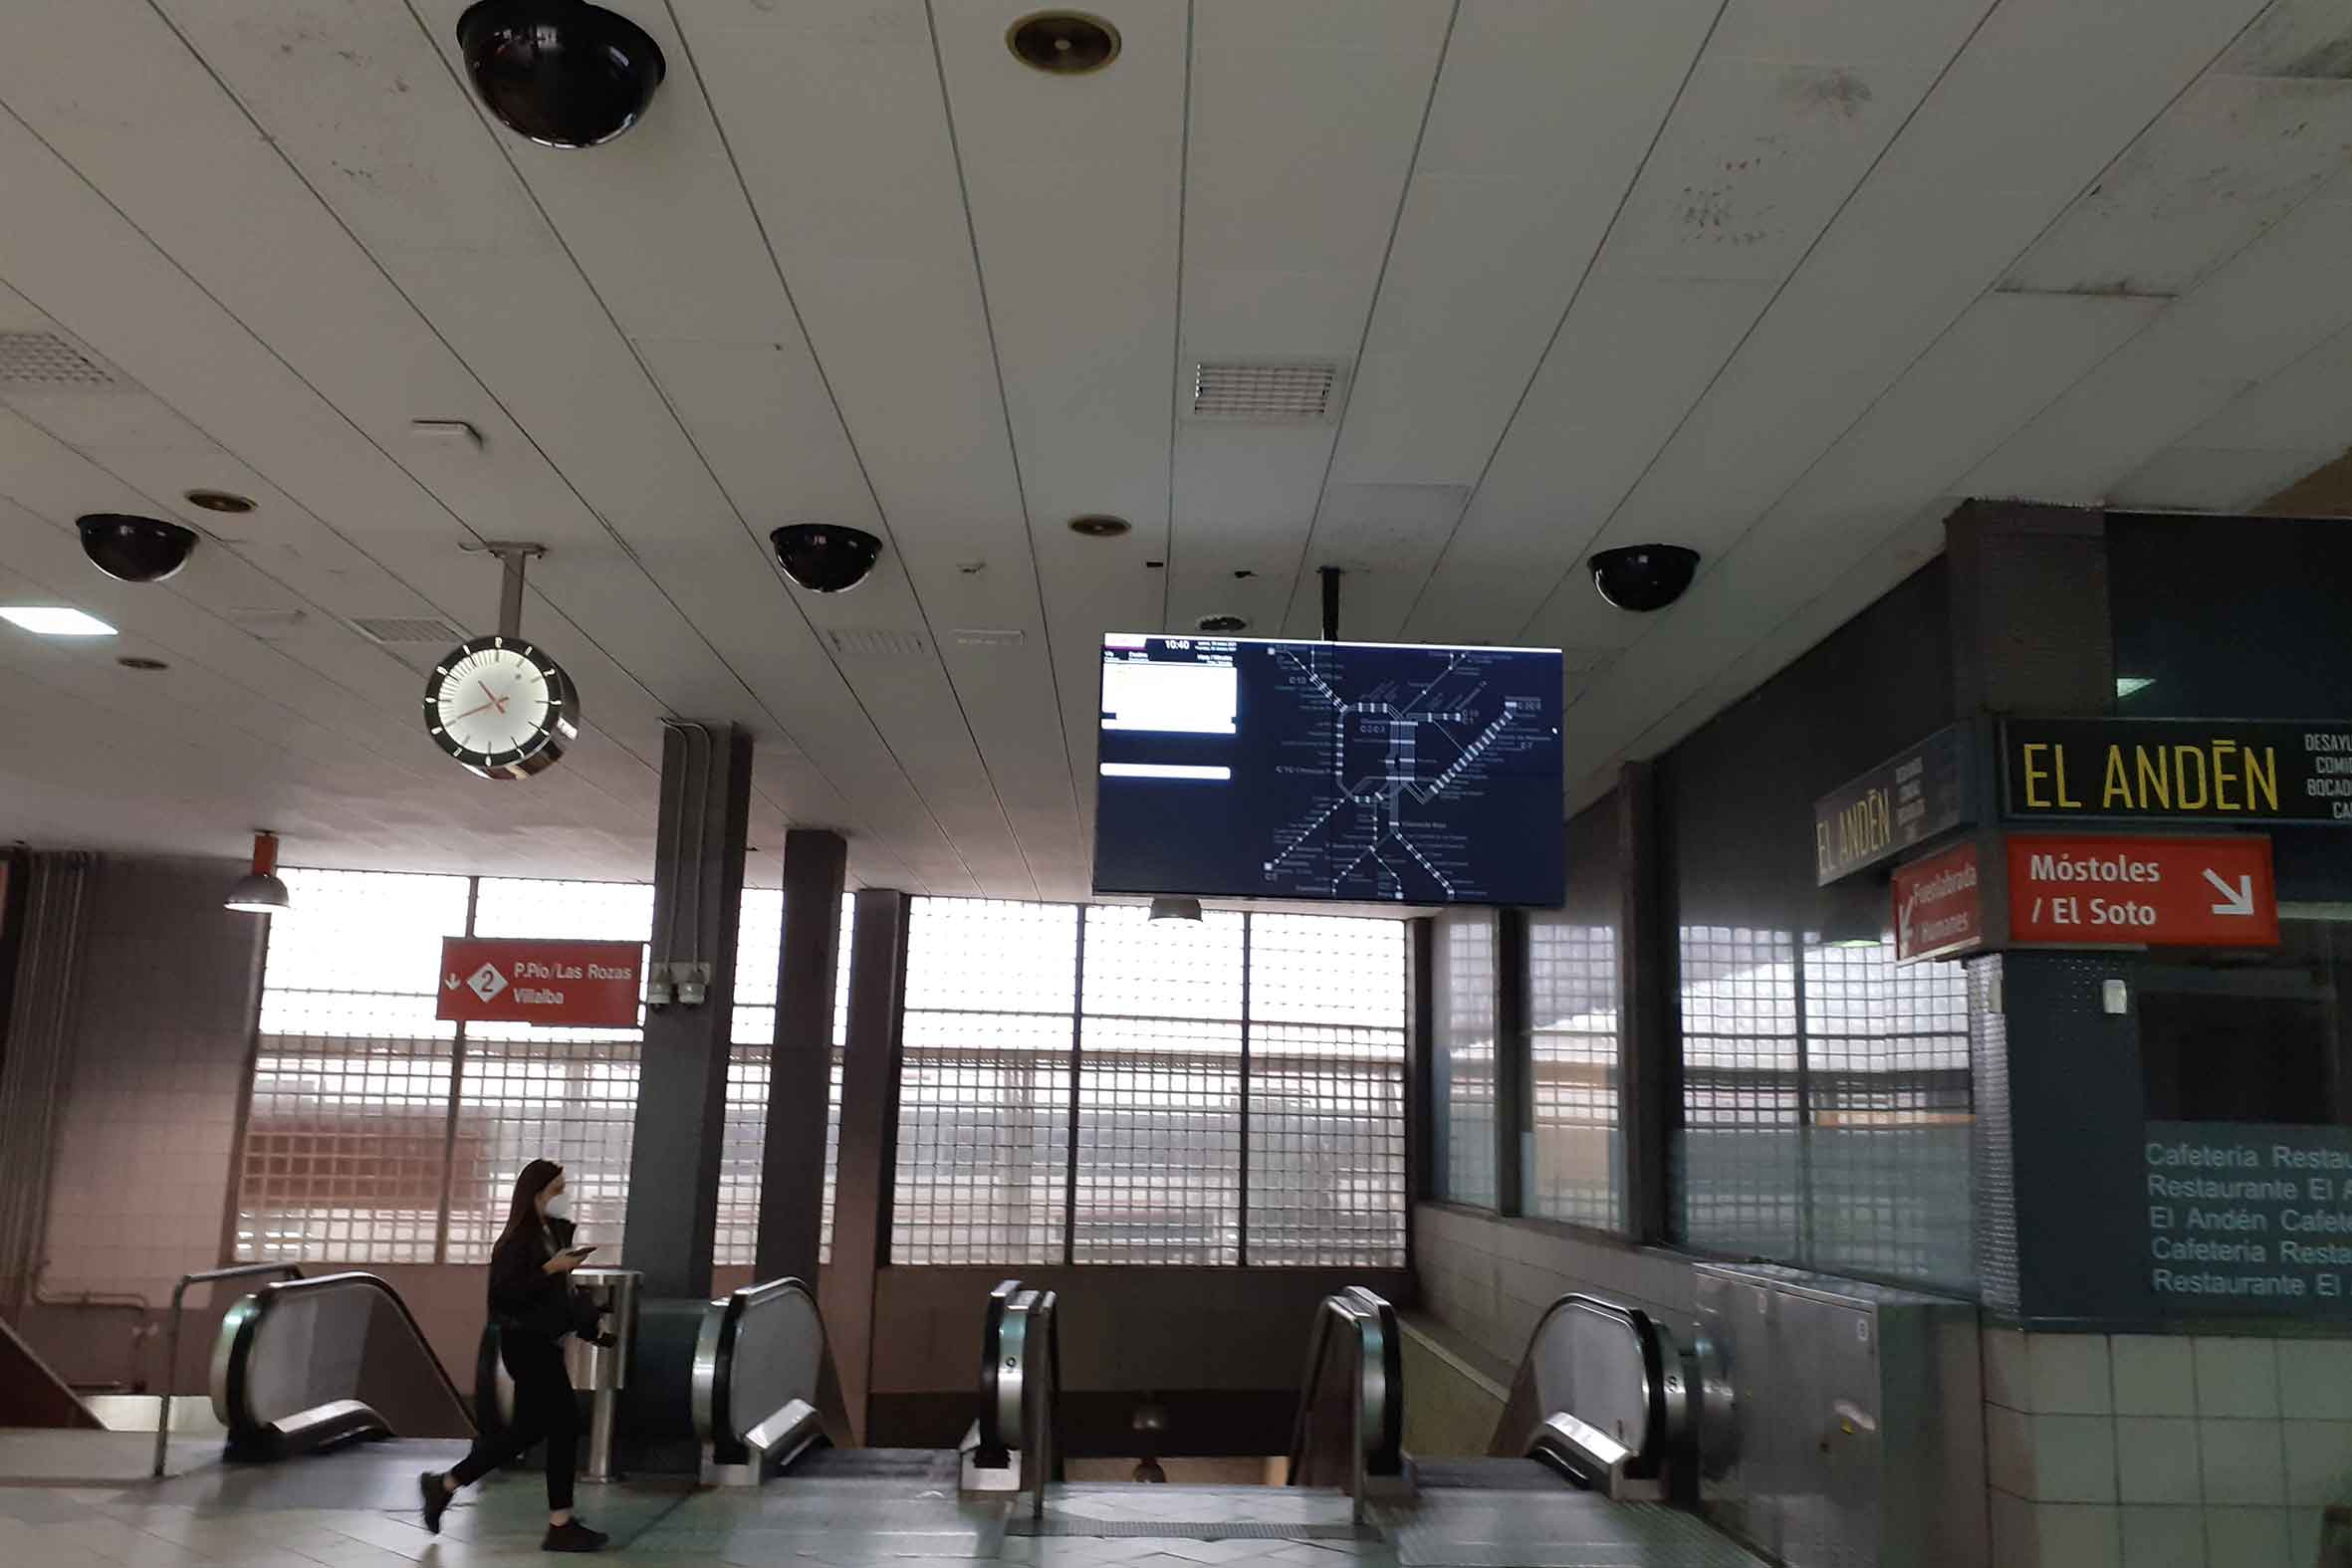 New SIV and IP intercom for Renfe stations